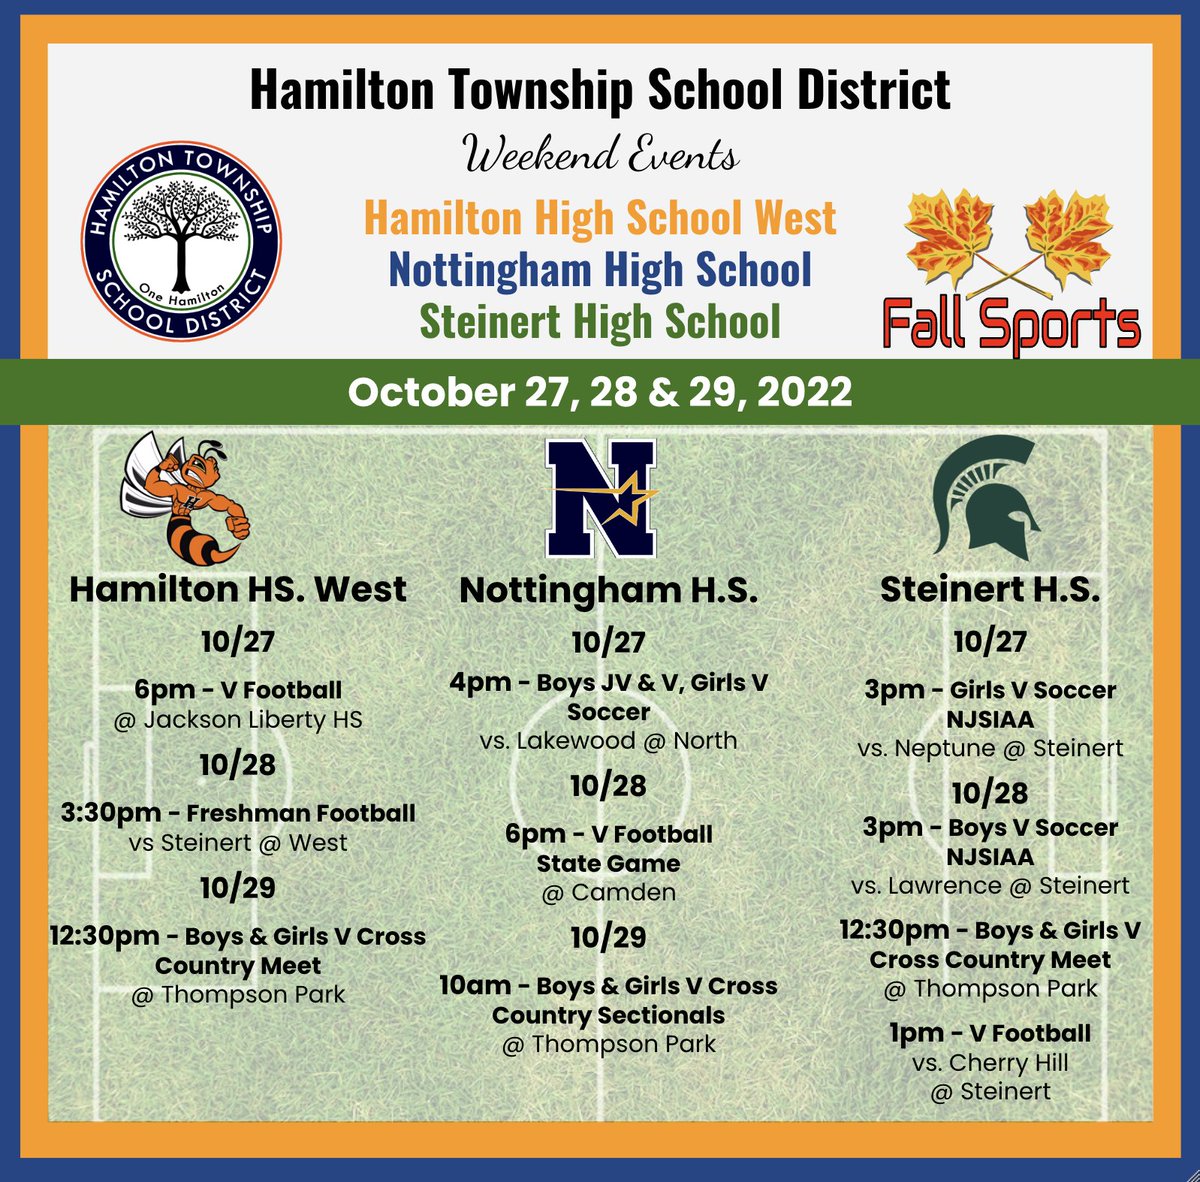 📣 TODAY in Hamilton! Weekend Sporting Events ⚽️🏈 🏑 📣 Good luck @NHSMarchingUnit @usbands State Competition 10/29 🥁 @ScottRRocco @HTSDSecondary @HTSD_Nottingham @HTSD_Steinert @HTSD_West @LauraGeltch @HamiltonTwpNJ @BigDawgAD @NorthstarsAD @HHW_Athletics #HTSD #HTSDpride